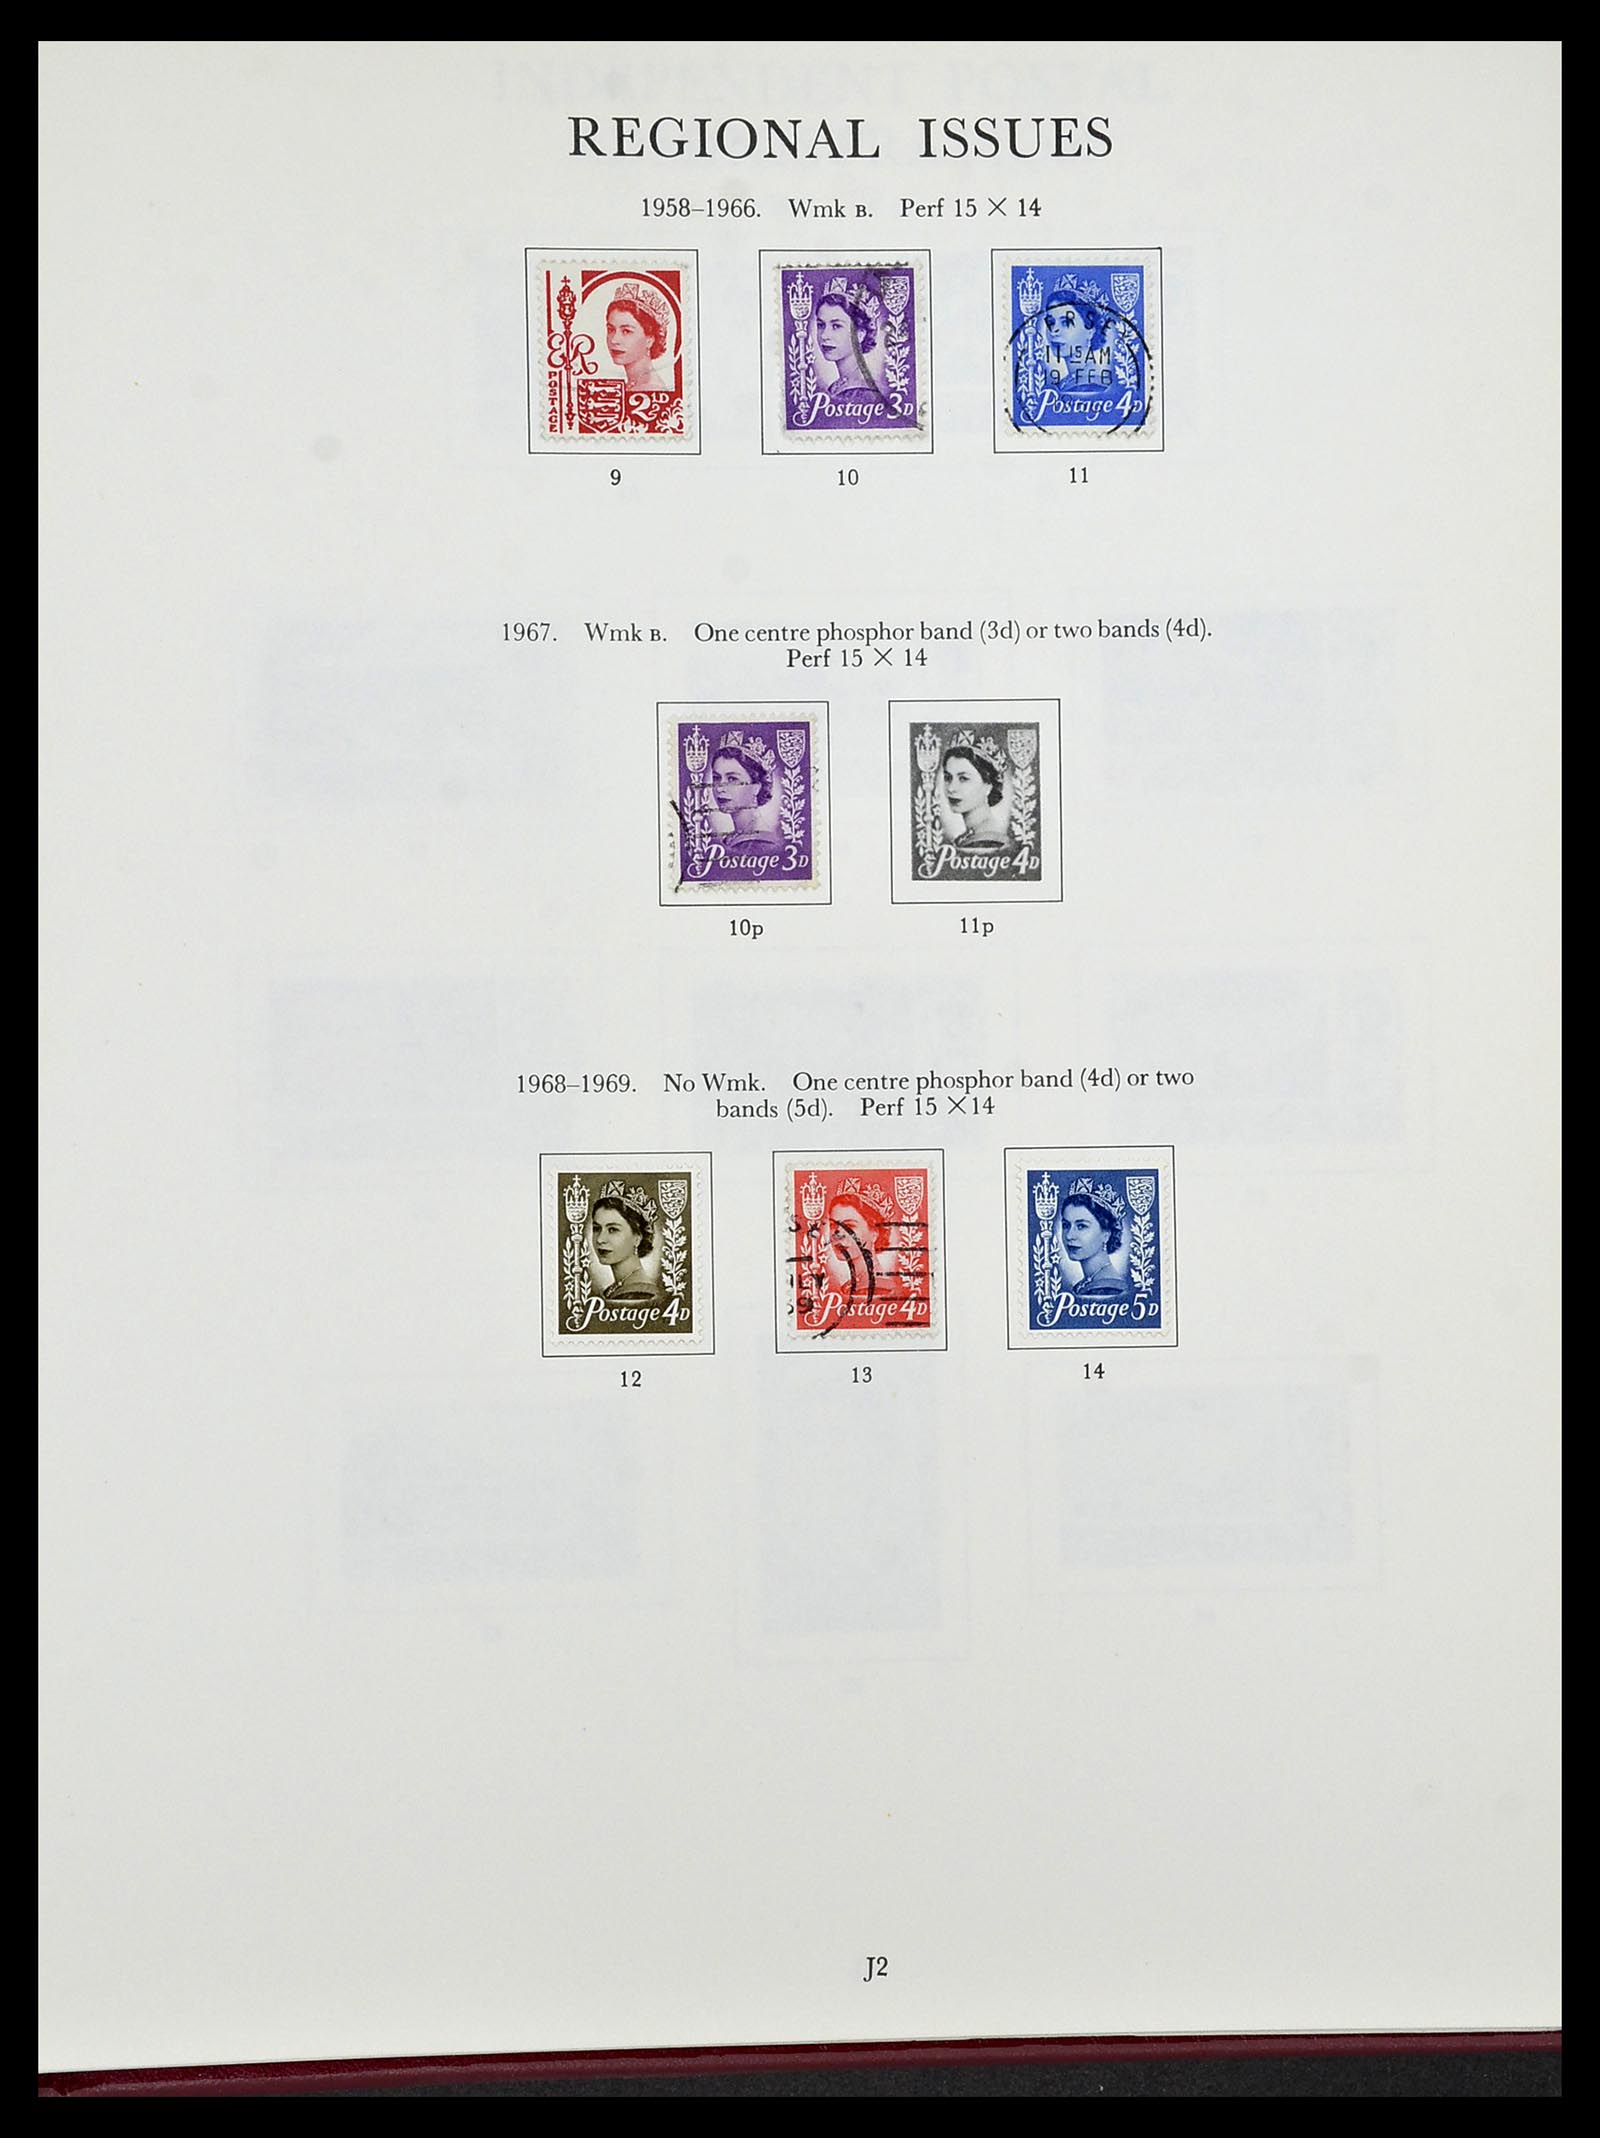 34276 029 - Stamp collection 34276 Channel Islands 1969-2006.